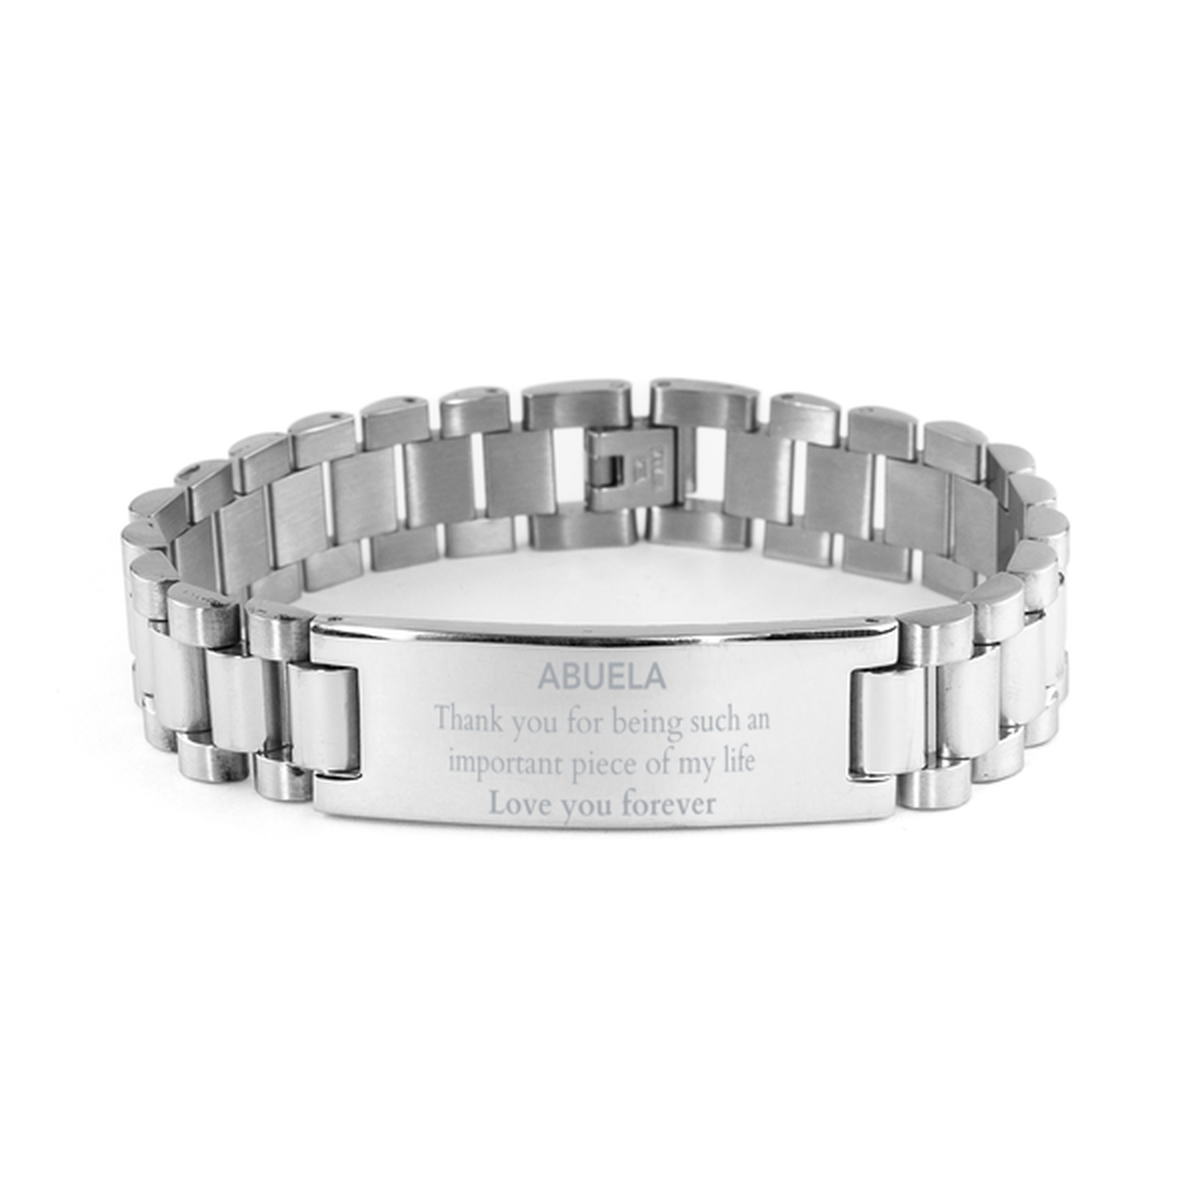 Appropriate Abuela Ladder Stainless Steel Bracelet Epic Birthday Gifts for Abuela Thank you for being such an important piece of my life Abuela Christmas Mothers Fathers Day